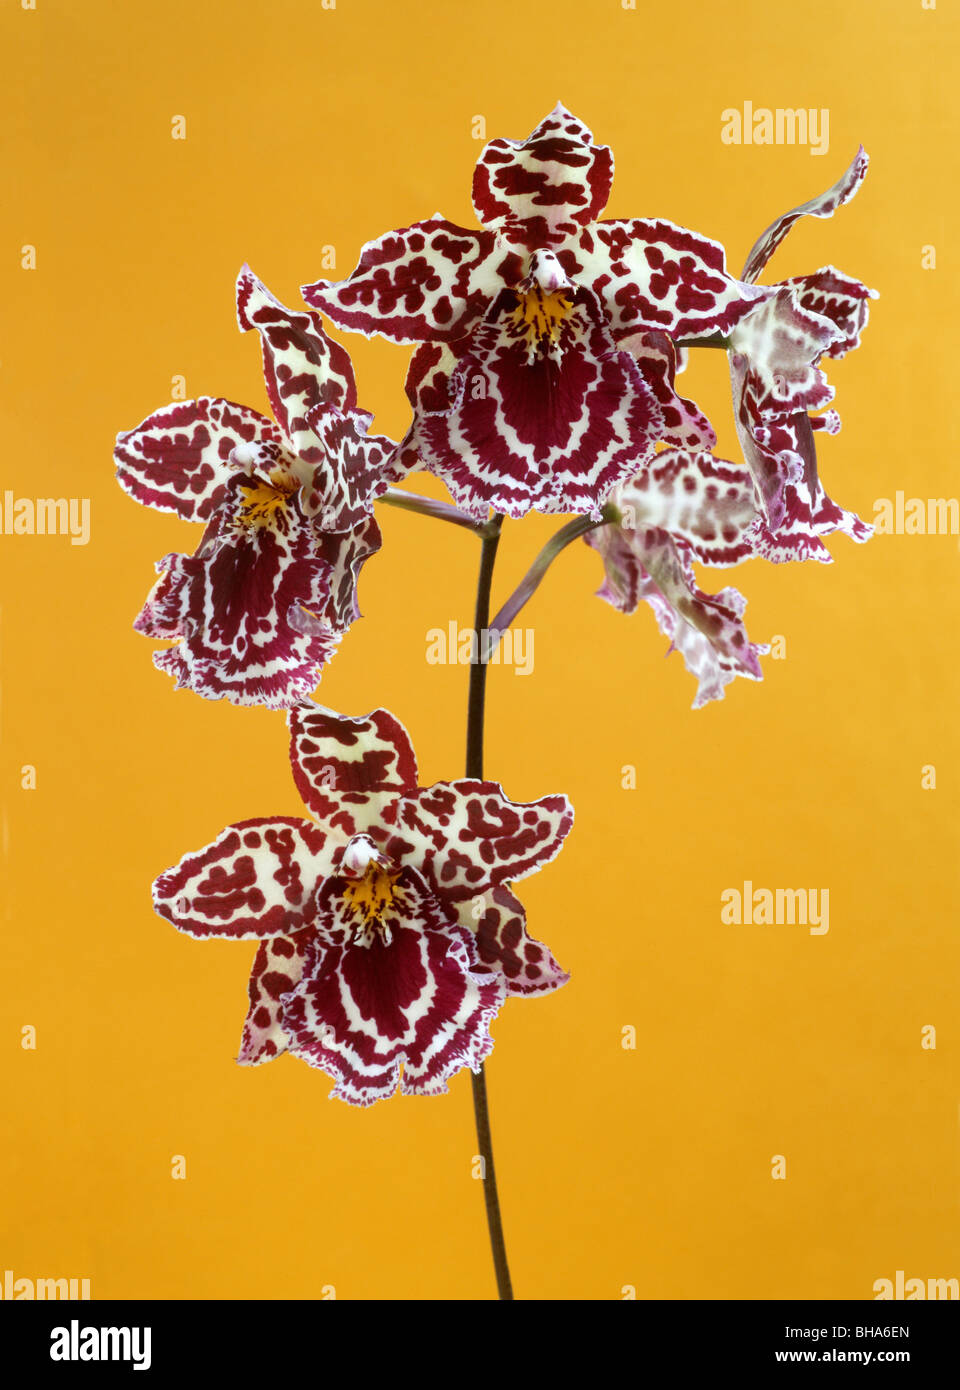 Spray of Cambria orchid flowers on orange background Stock Photo